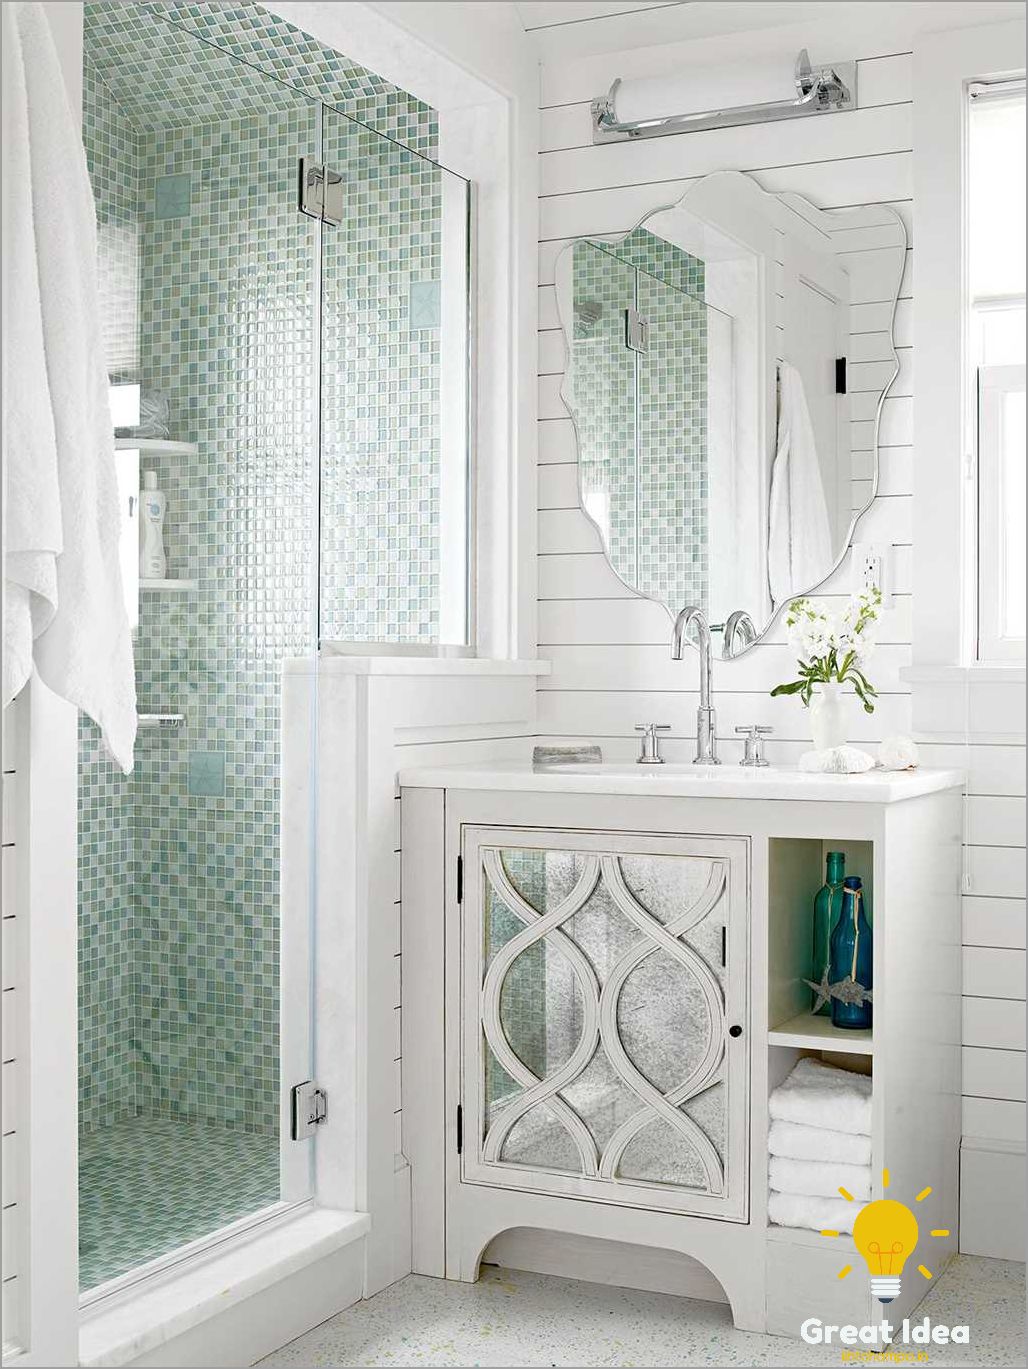 Stunning Tile Shower Ideas for Small Bathrooms - Transform Your Space